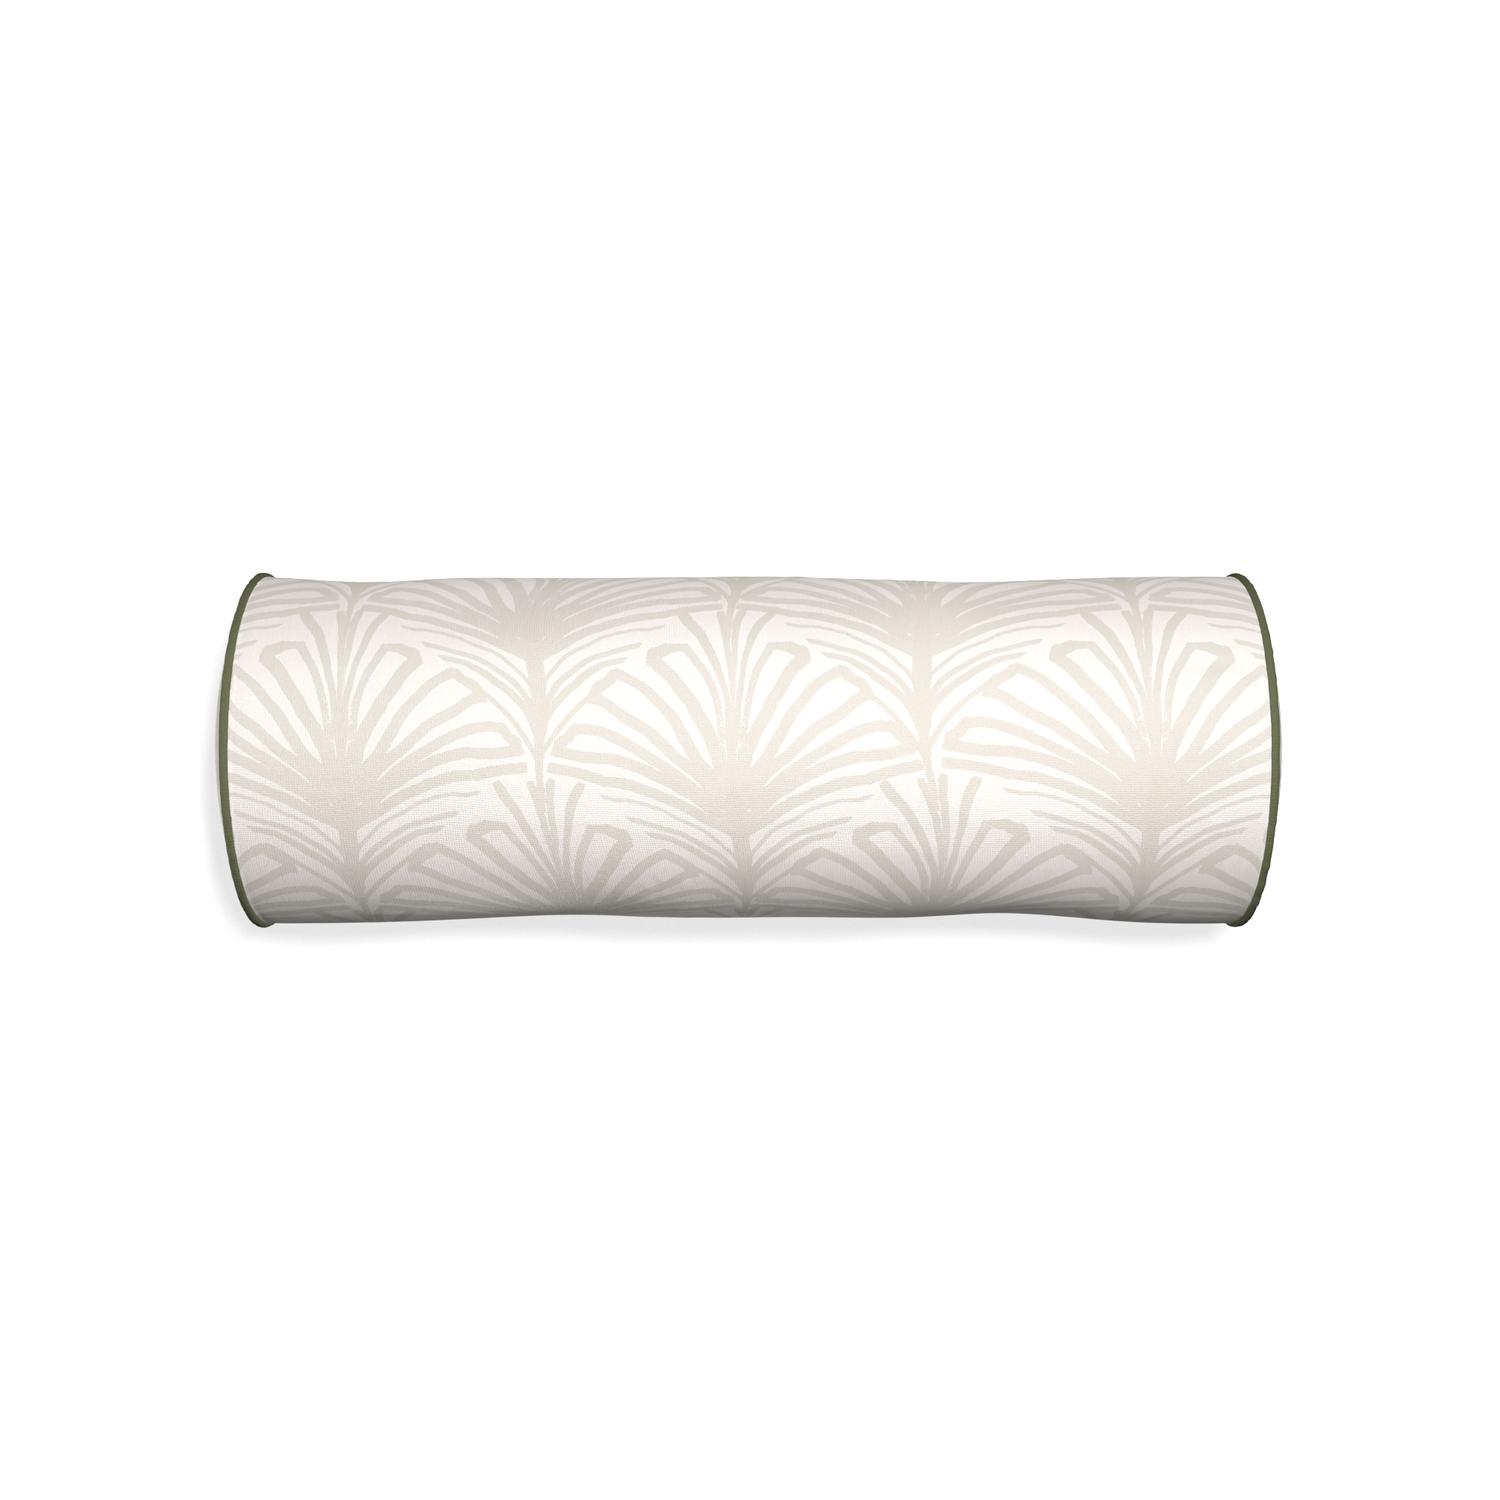 Bolster suzy sand custom beige palmpillow with f piping on white background